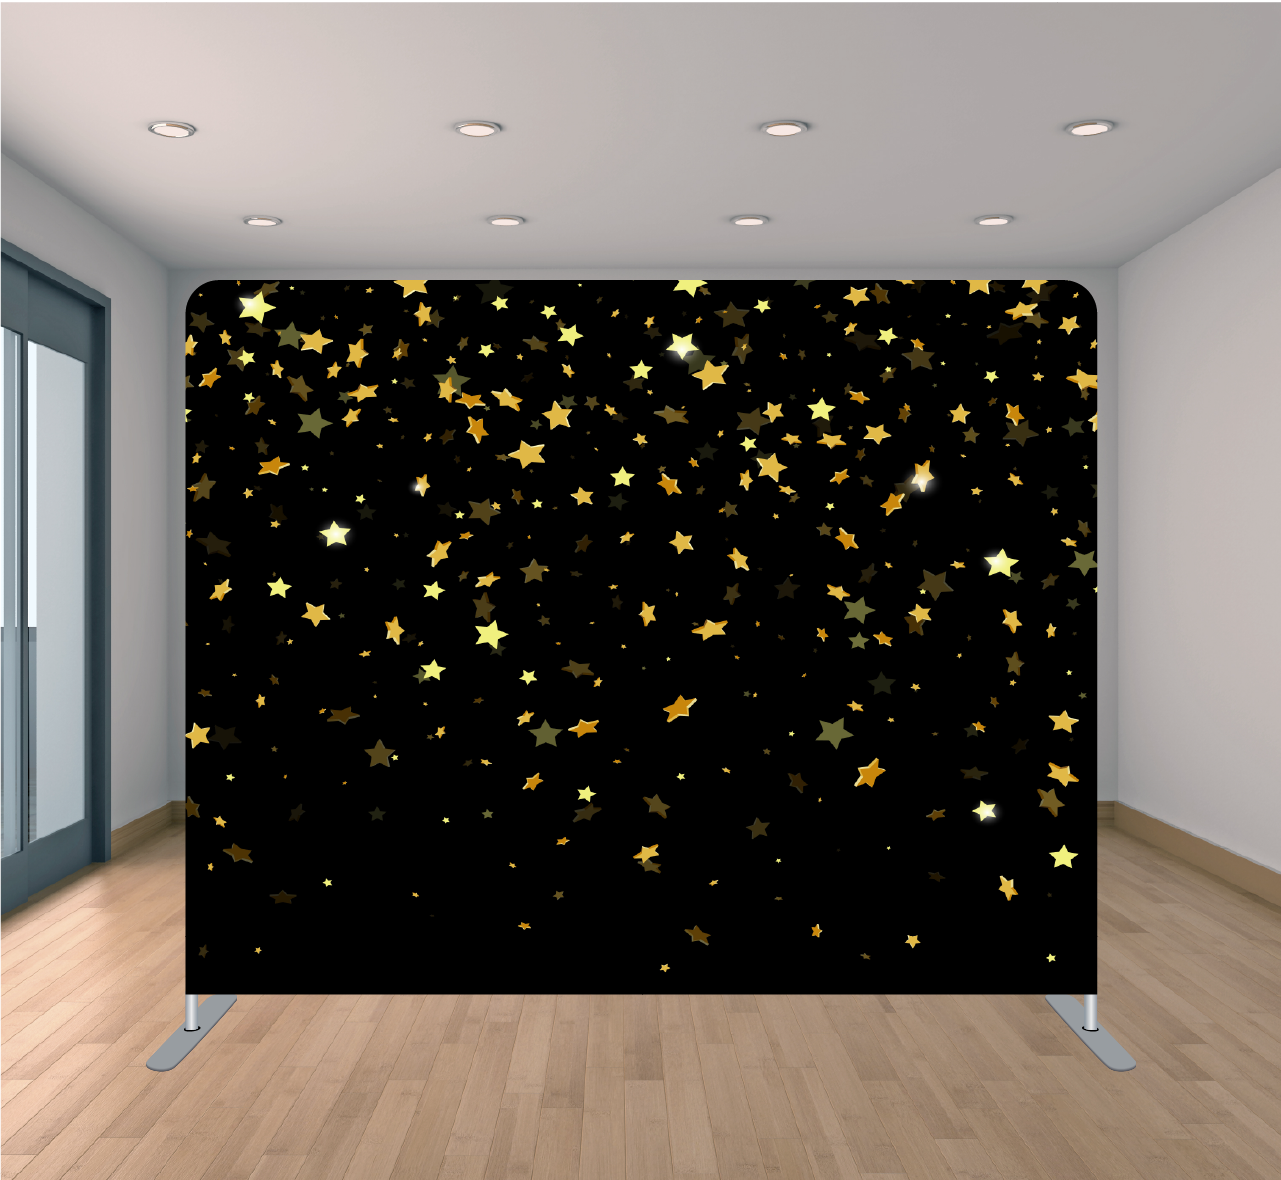 8x8ft Pillowcase Tension Backdrop- Black with Yellow Stars